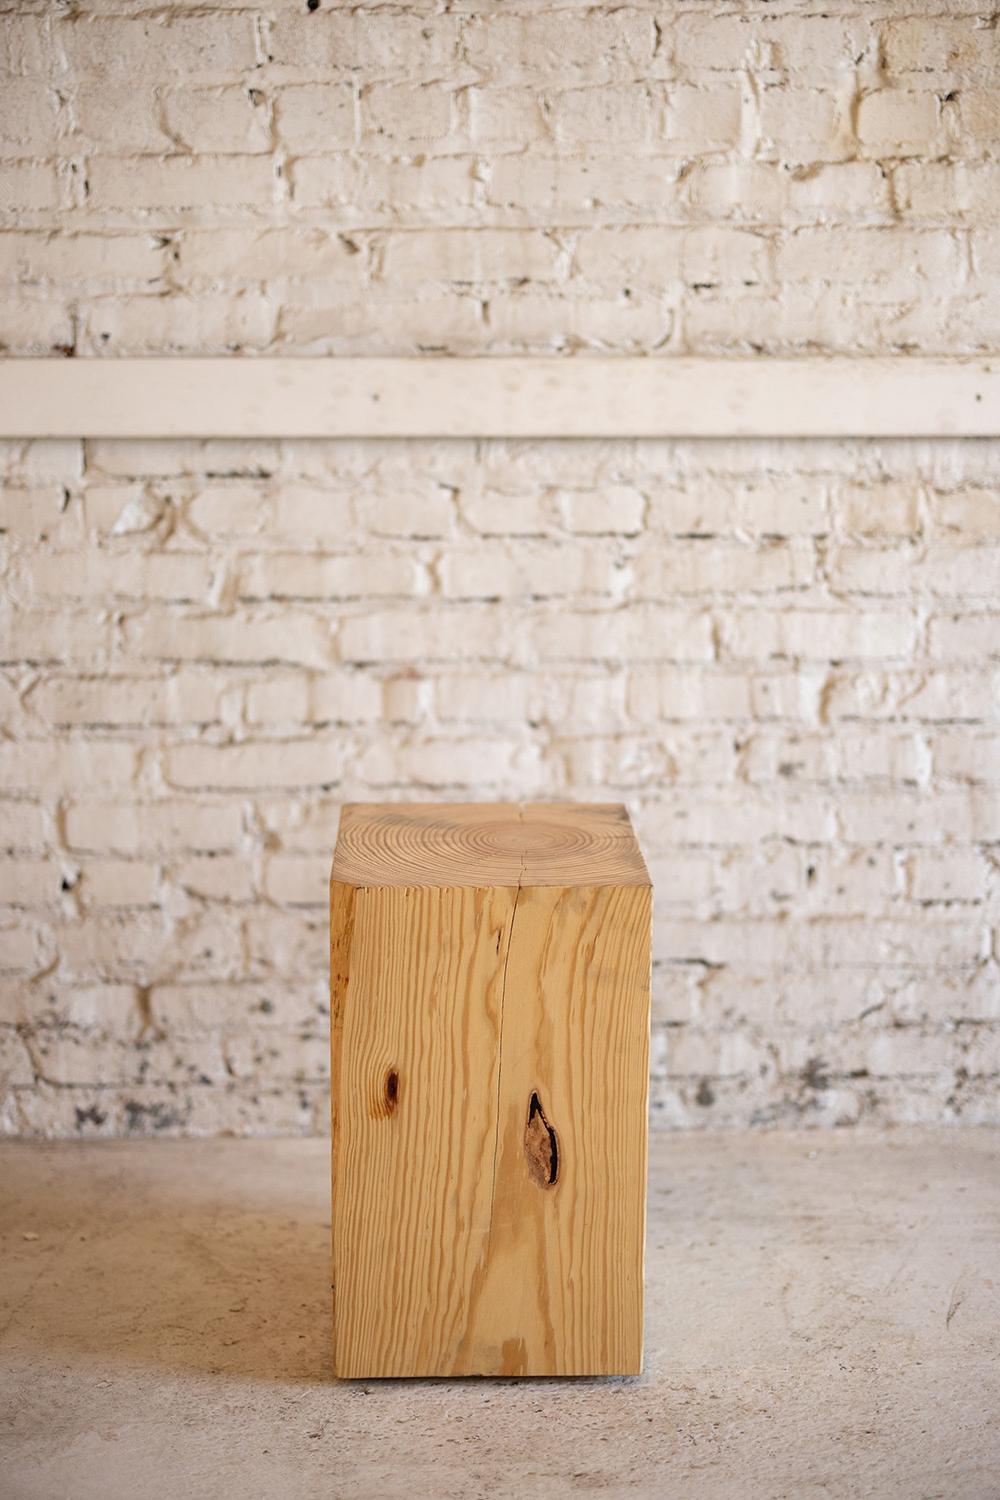 Rustic style solid wood cube side salvaged pine is simple and versatile. The sturdy 